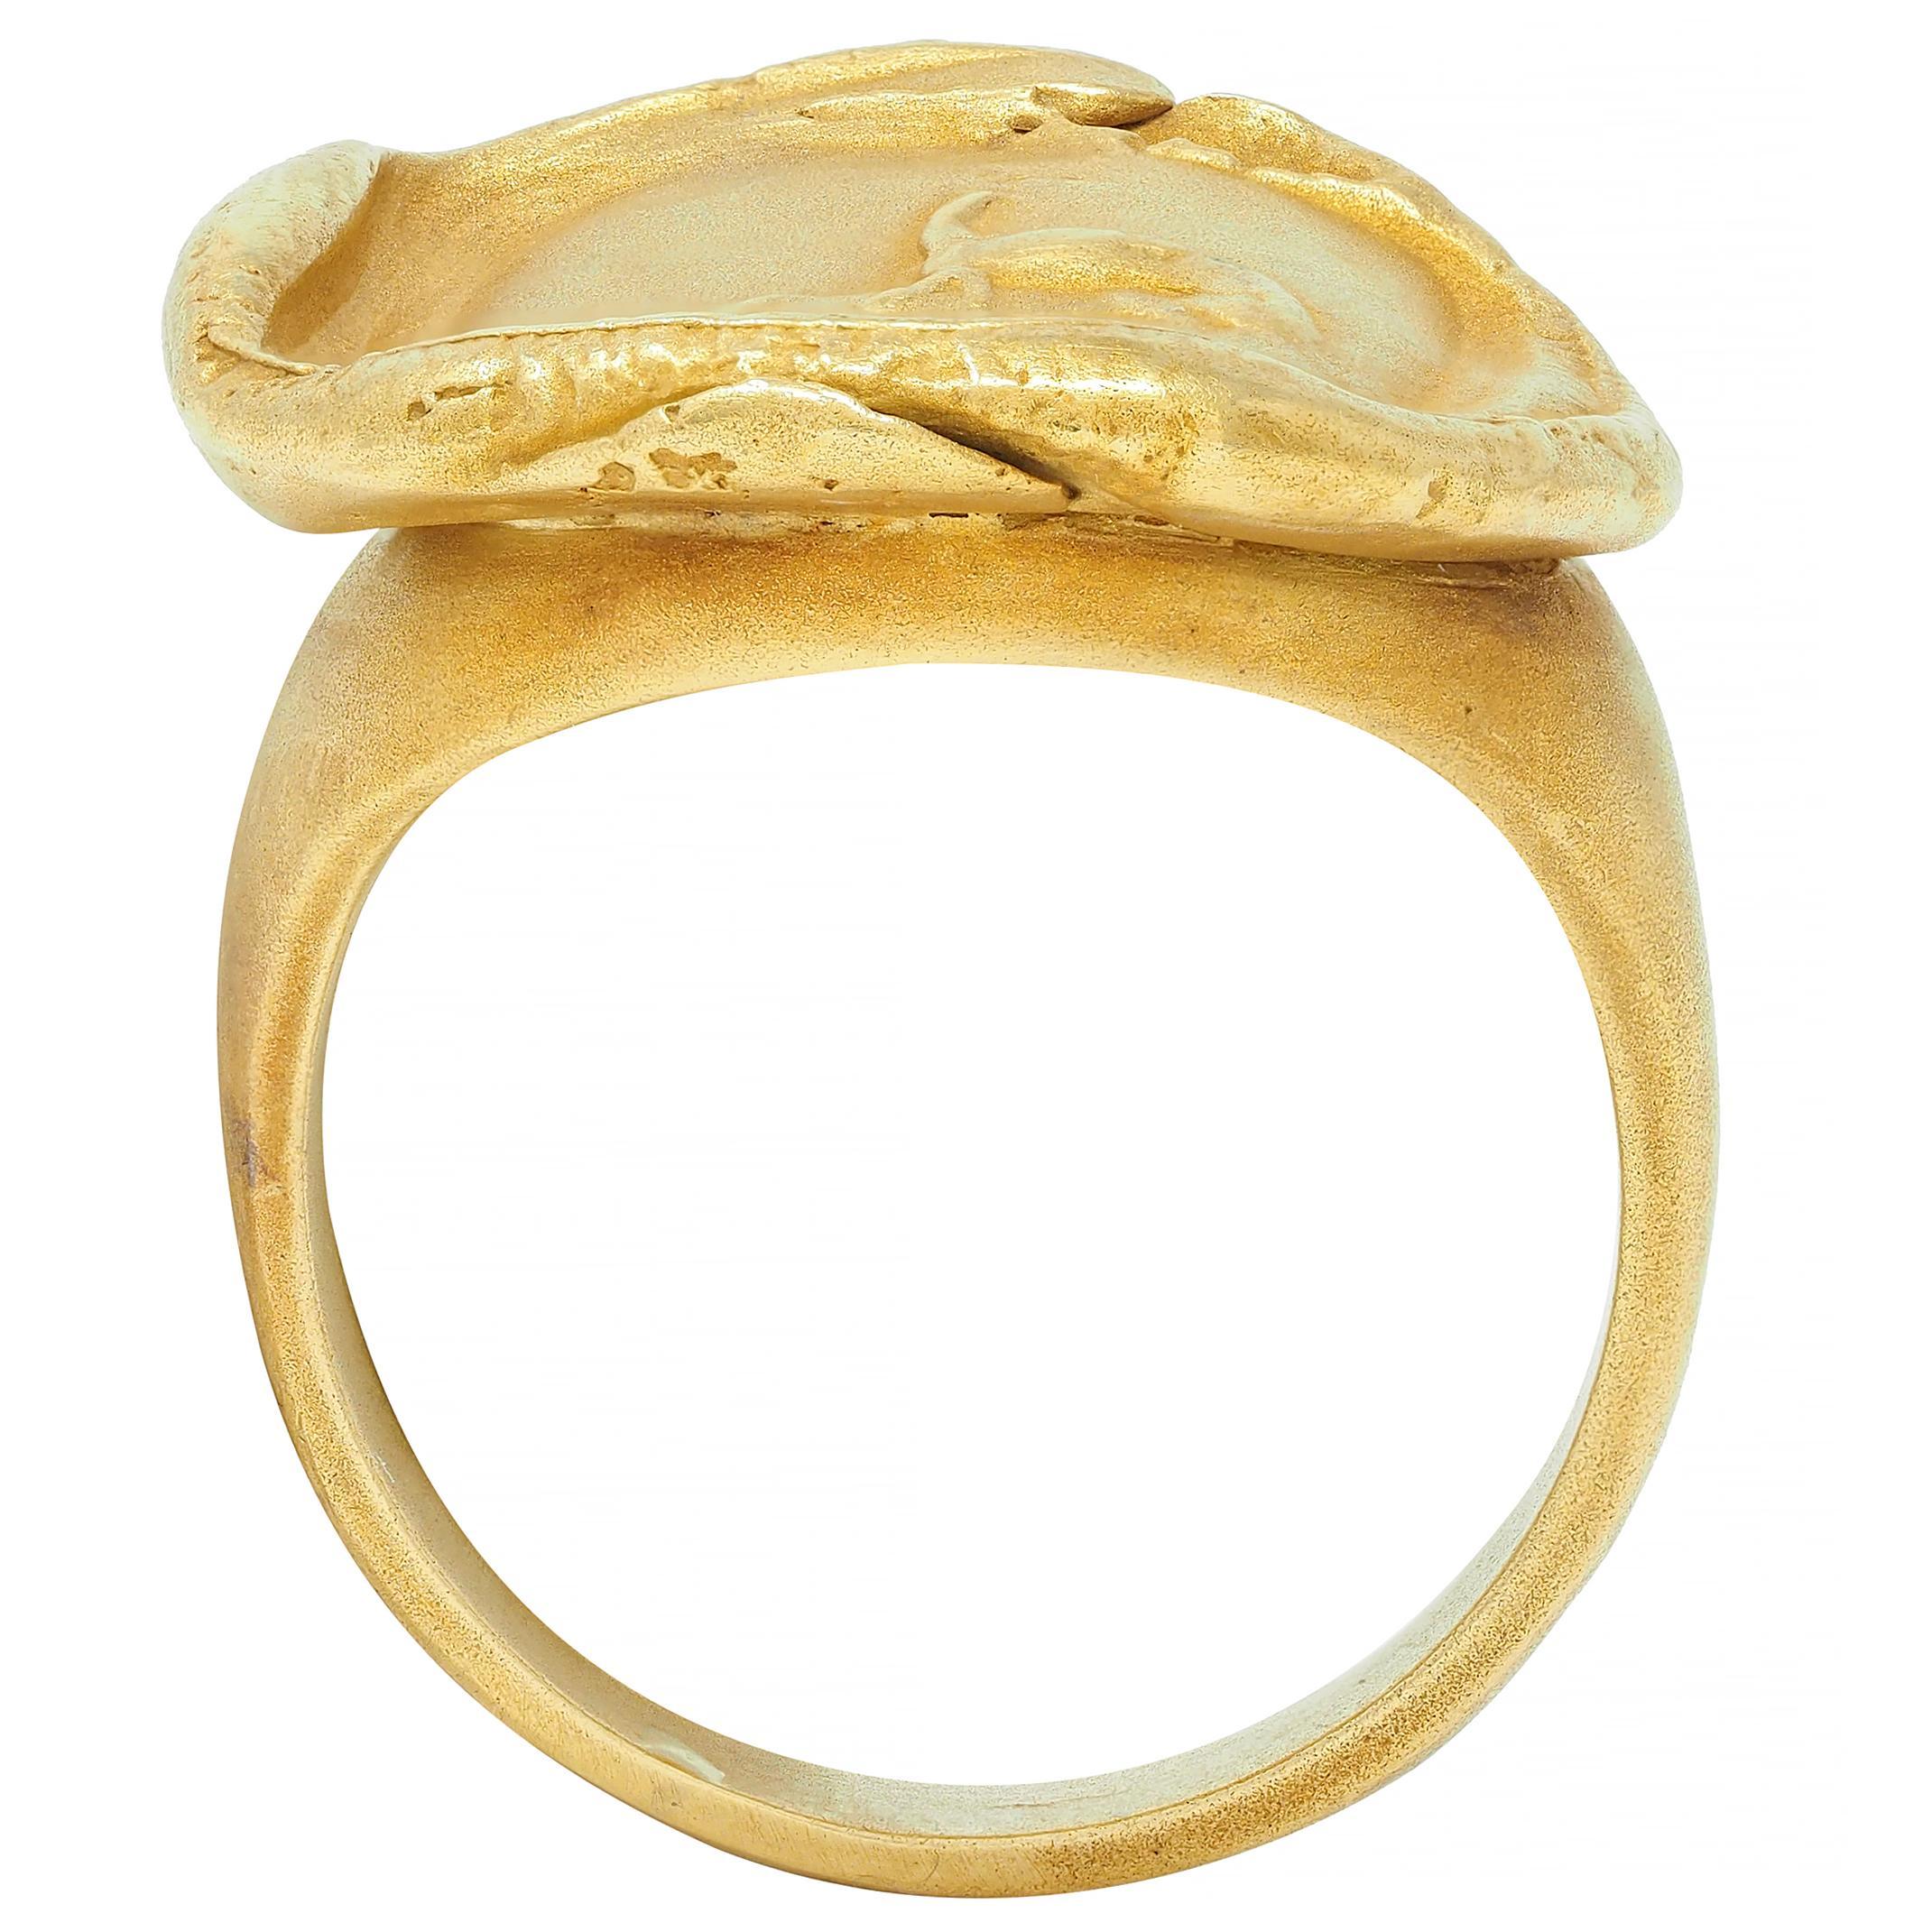 Kieselstein-Cord 18K Yellow Gold Abstrac Animal Intaglio Vintage Signet Ring For Sale 6